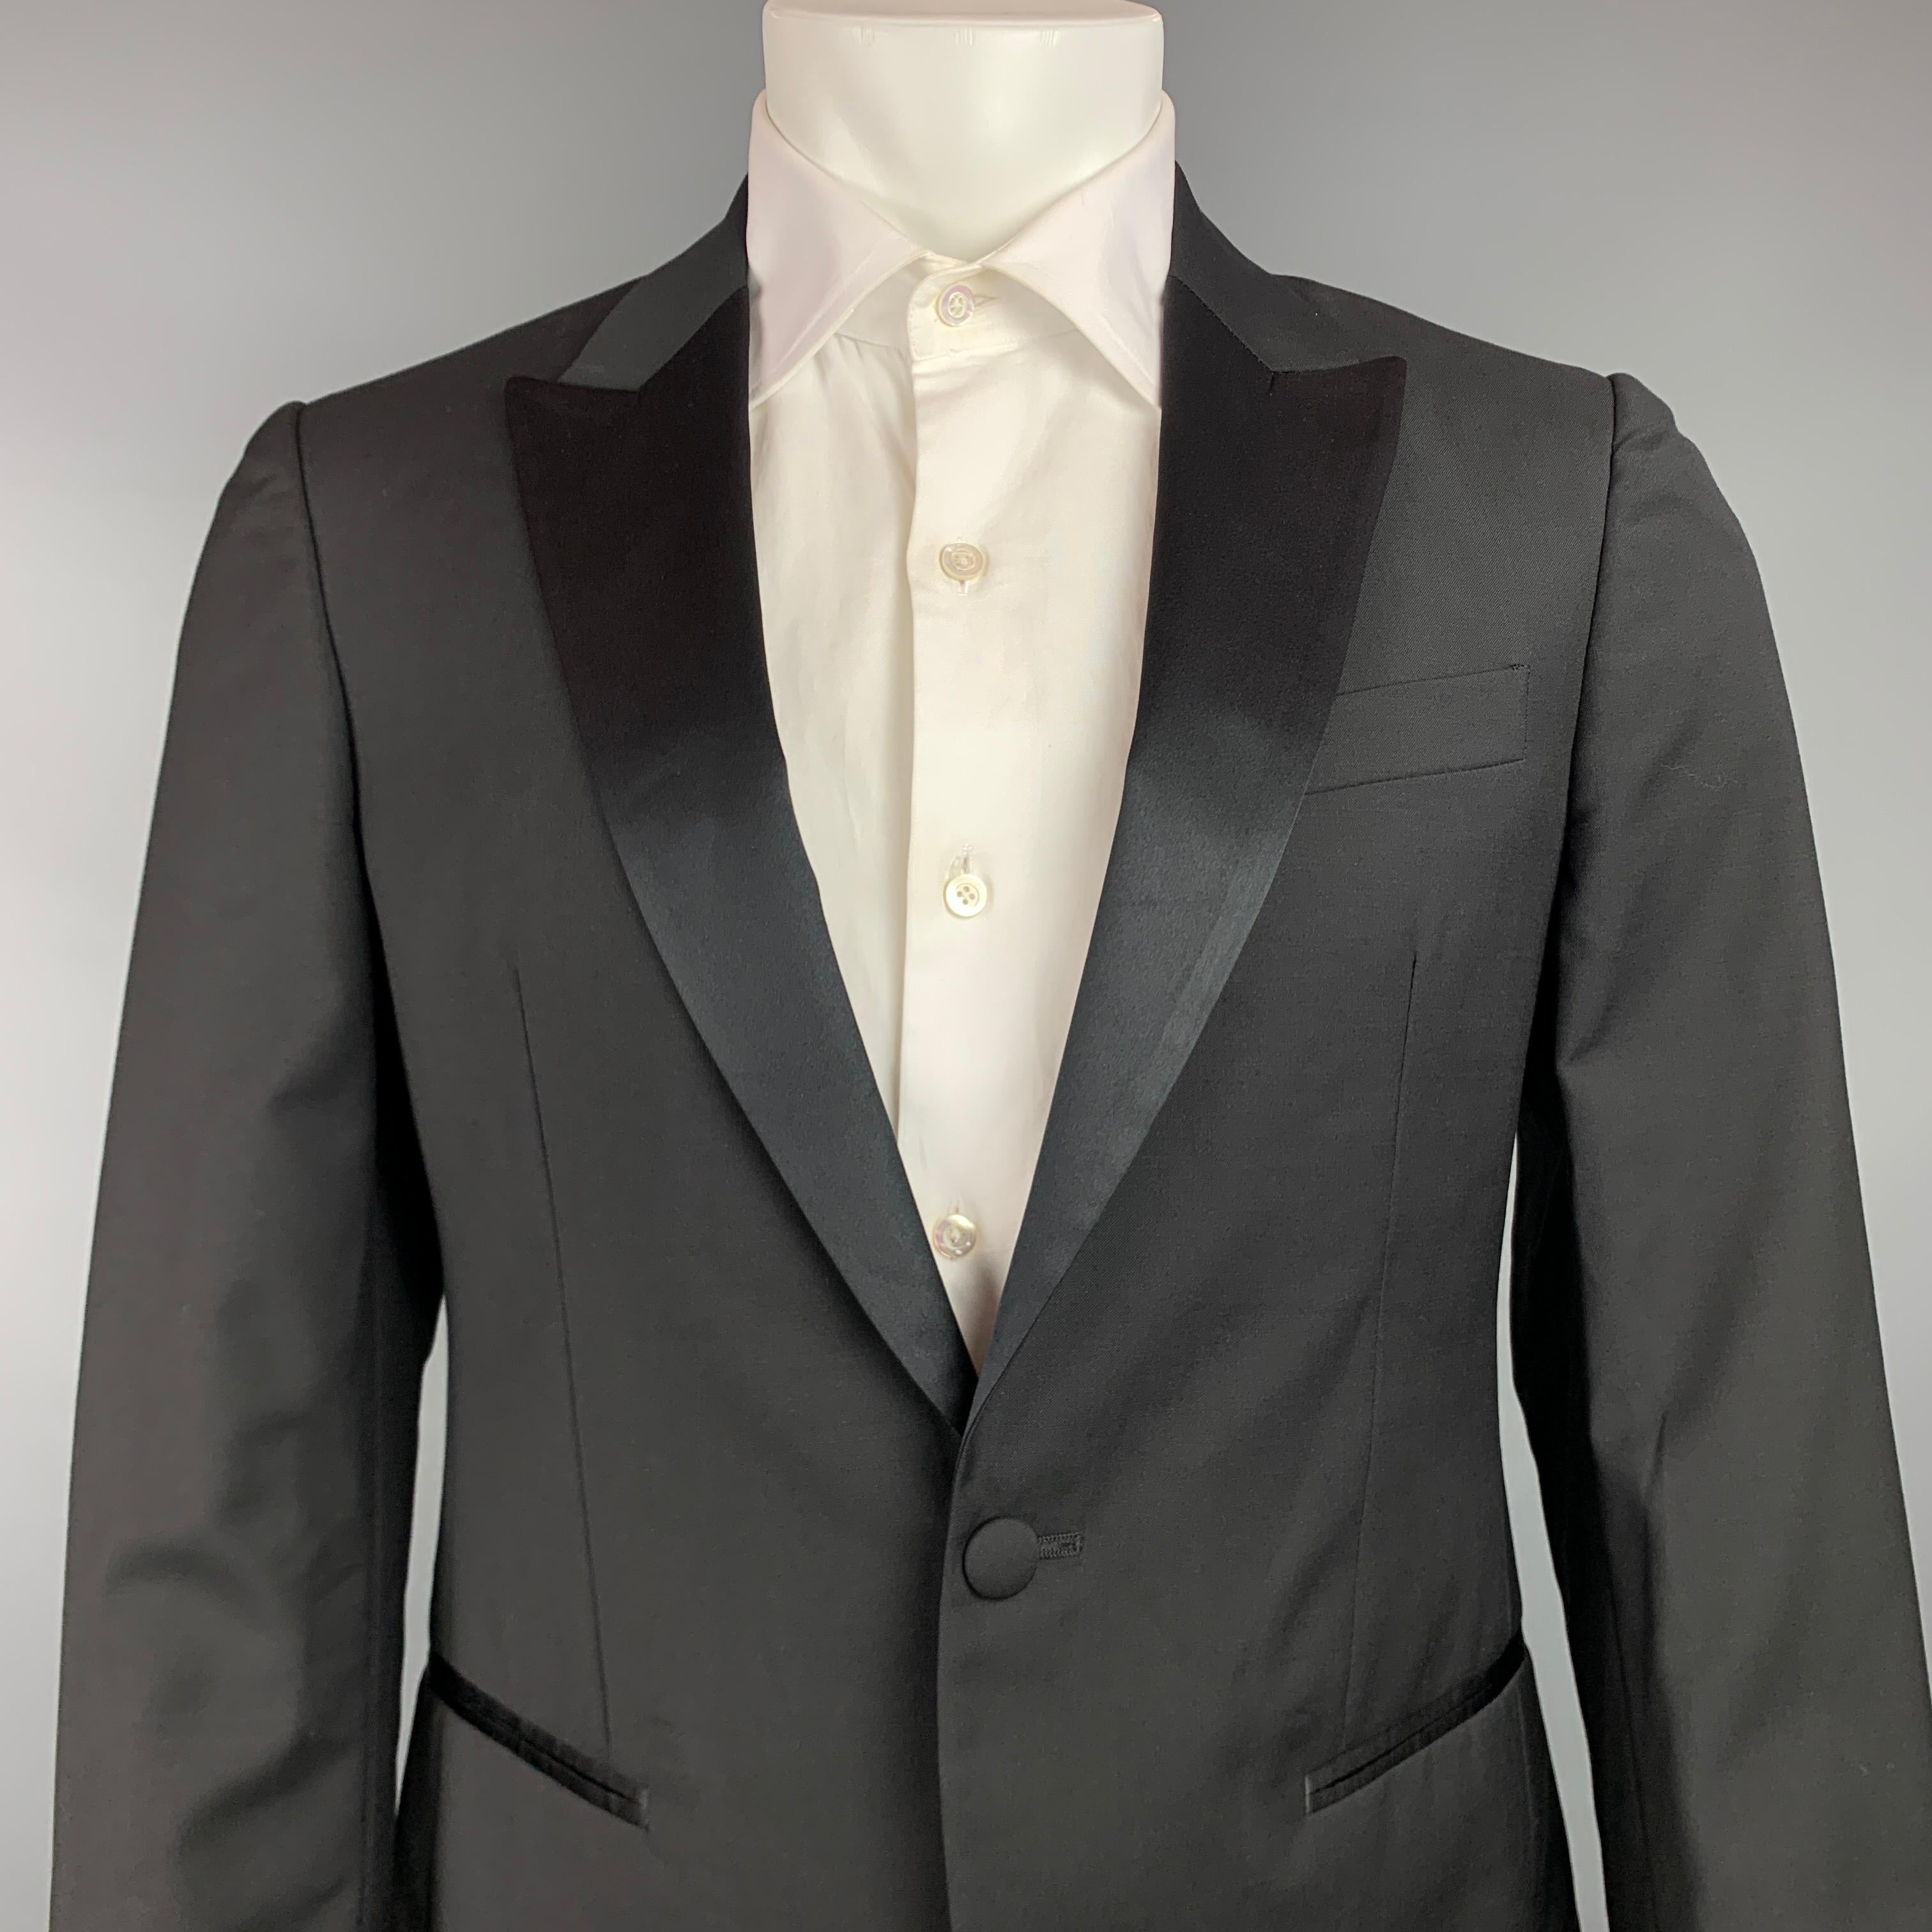 JOHN VARVATOS sport coat comes in a black wool / mohair with a full liner featuring a peak lapel, slit pockets, and a single button closure. Made in Italy.

Very Good Pre-Owned Condition.
Marked: 48

Measurements:

Shoulder: 17.5 in.
Chest: 38